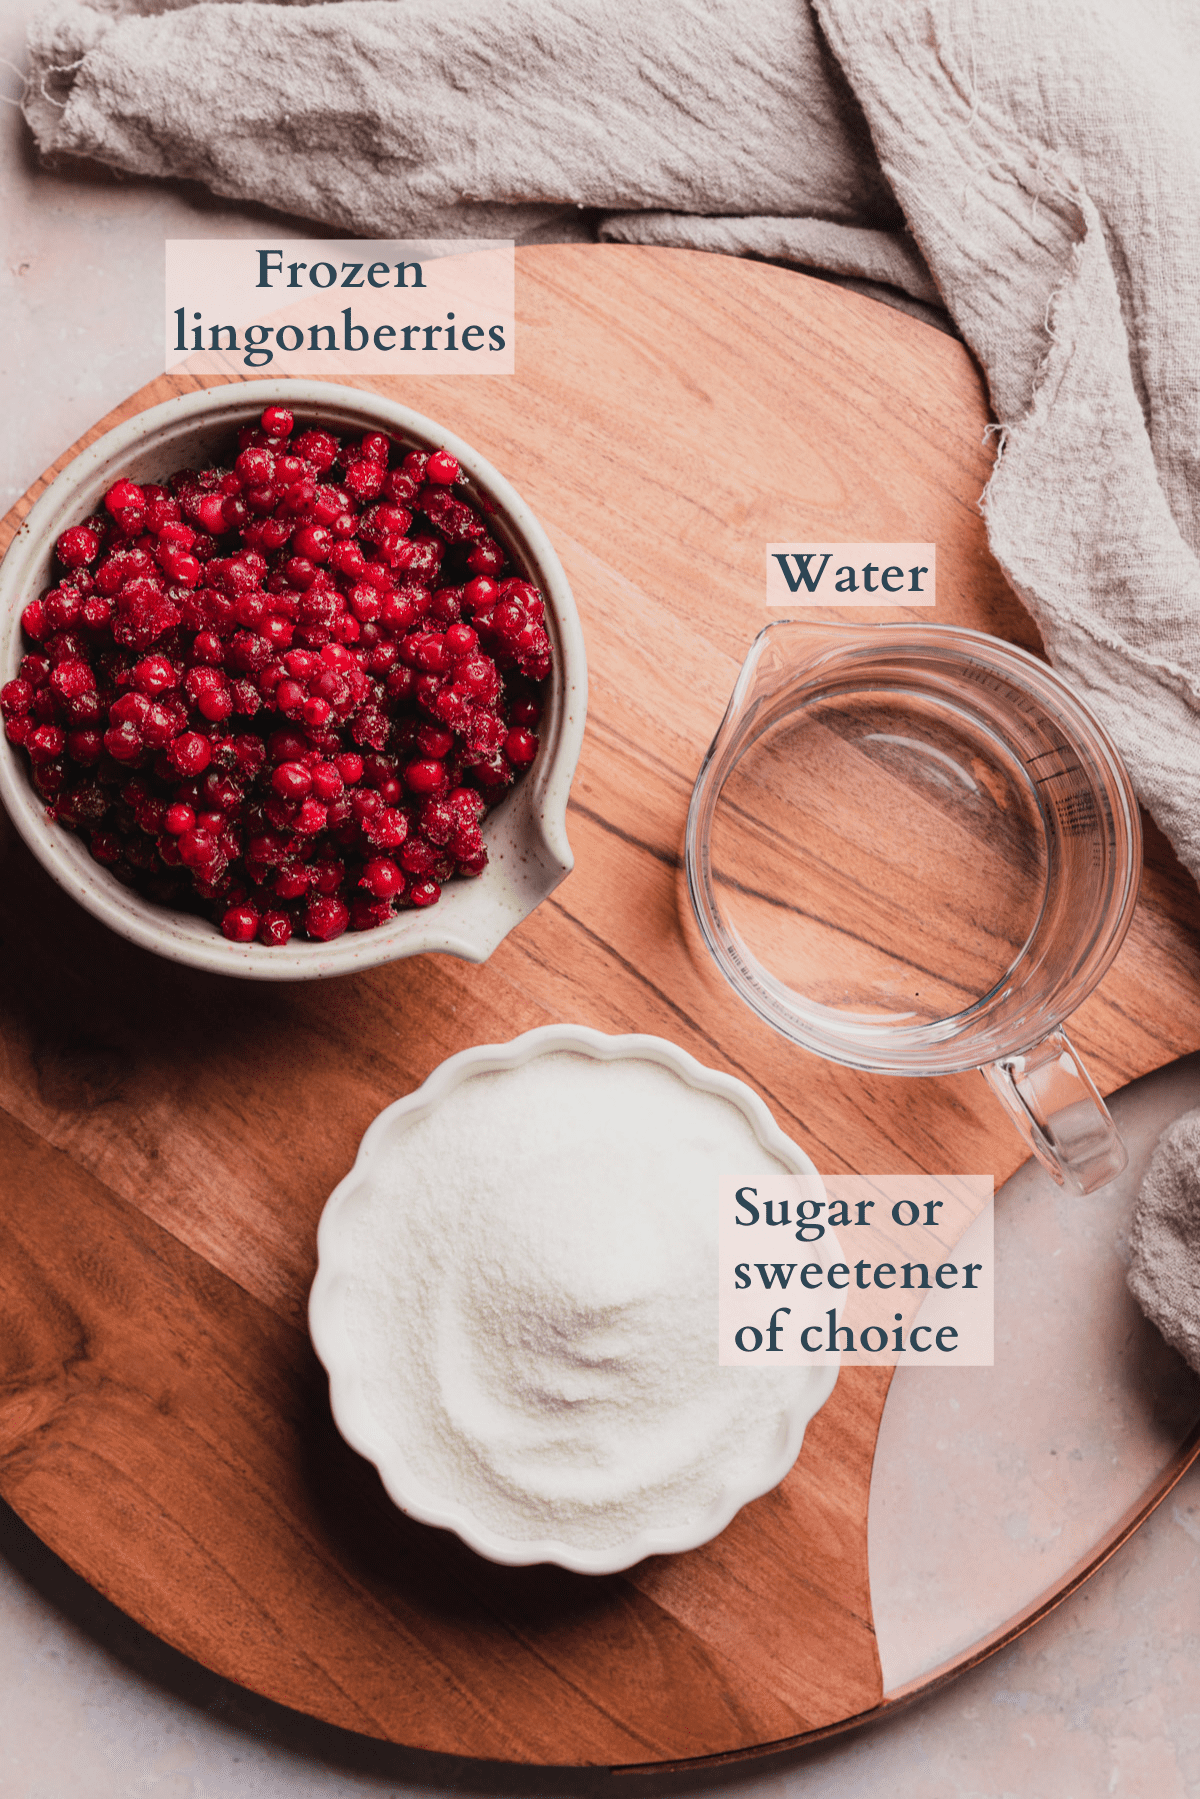 lingonberry sauce recipe ingredients graphic with text to denote different ingredients.